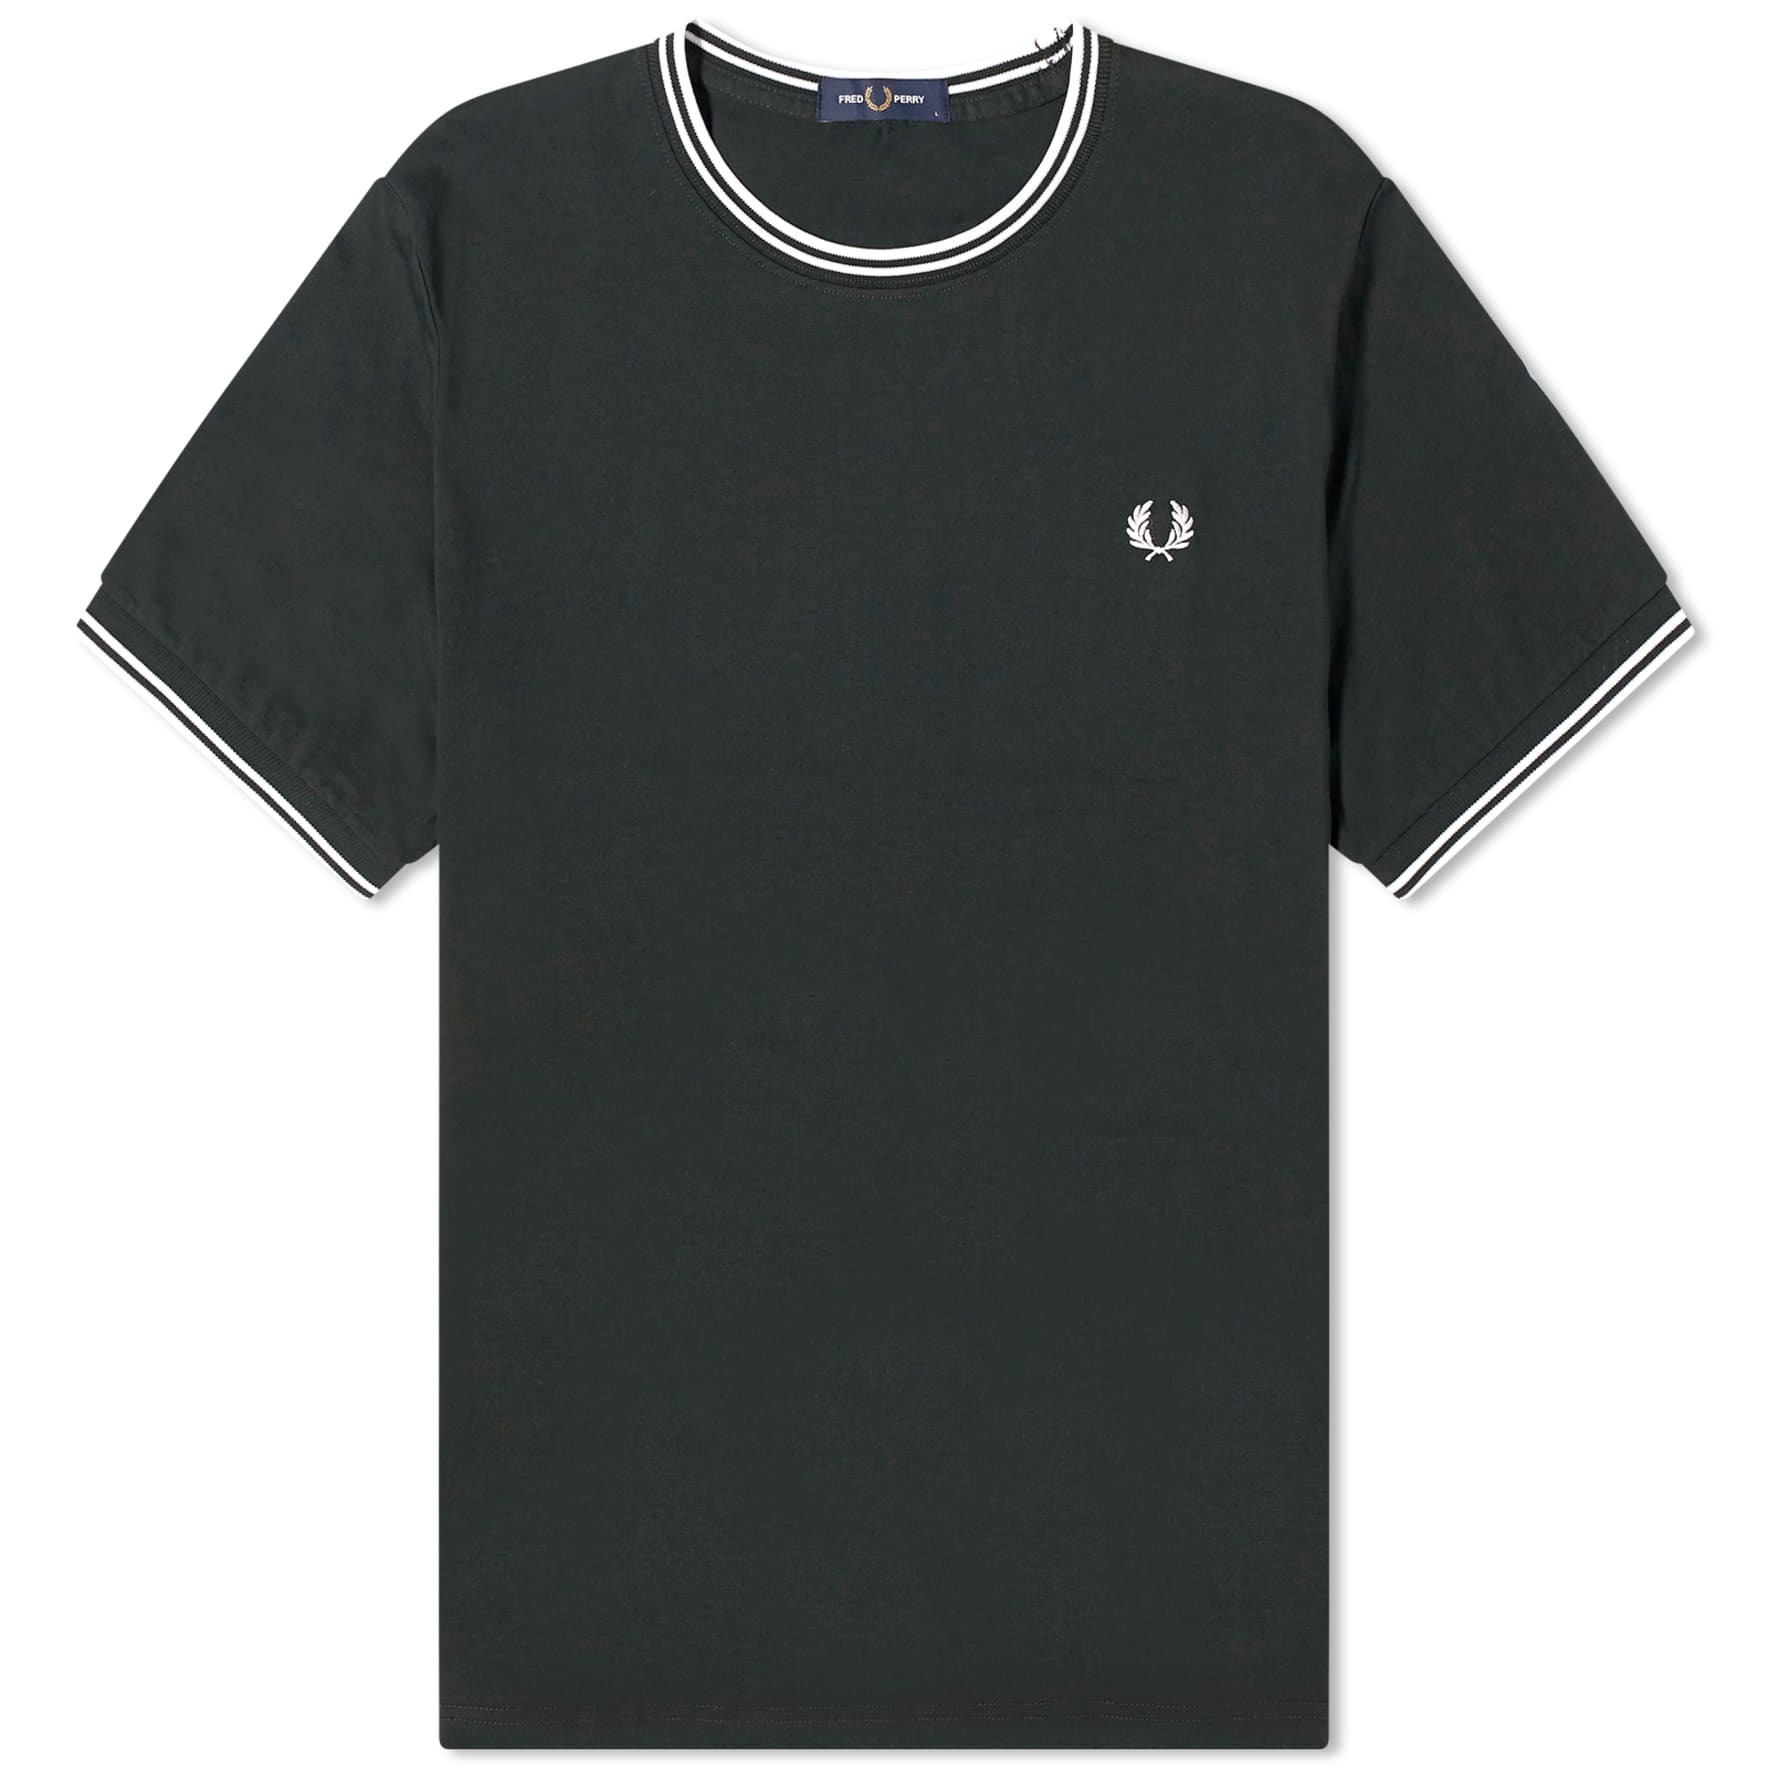 Футболка Fred Perry Twin Tipped, черно-зеленый/белый поло fred perry twin tipped цвет french navy